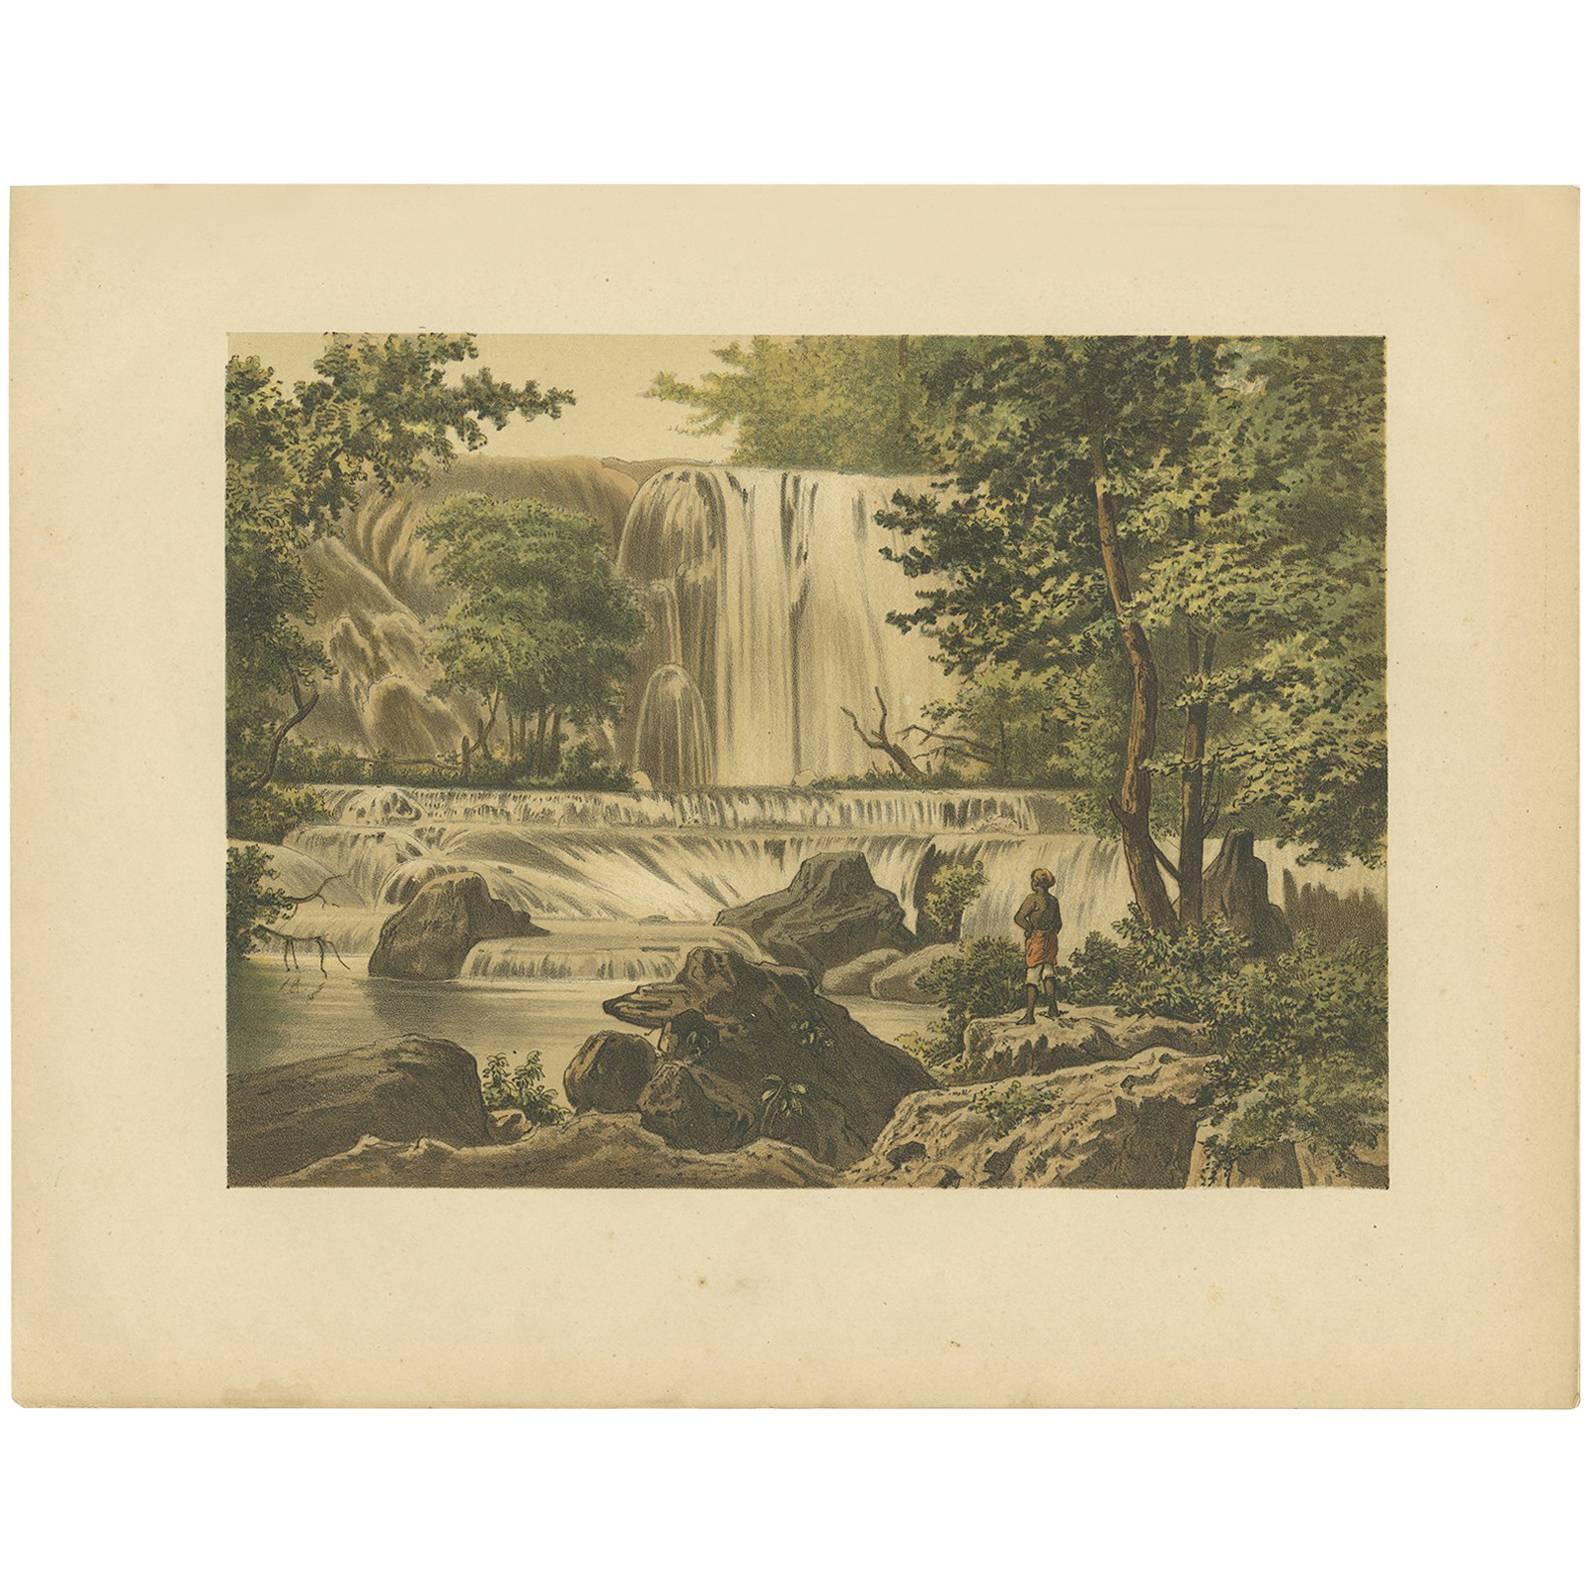 Antique Print of a Waterfall on Java by M.T.H. Perelaer, 1888